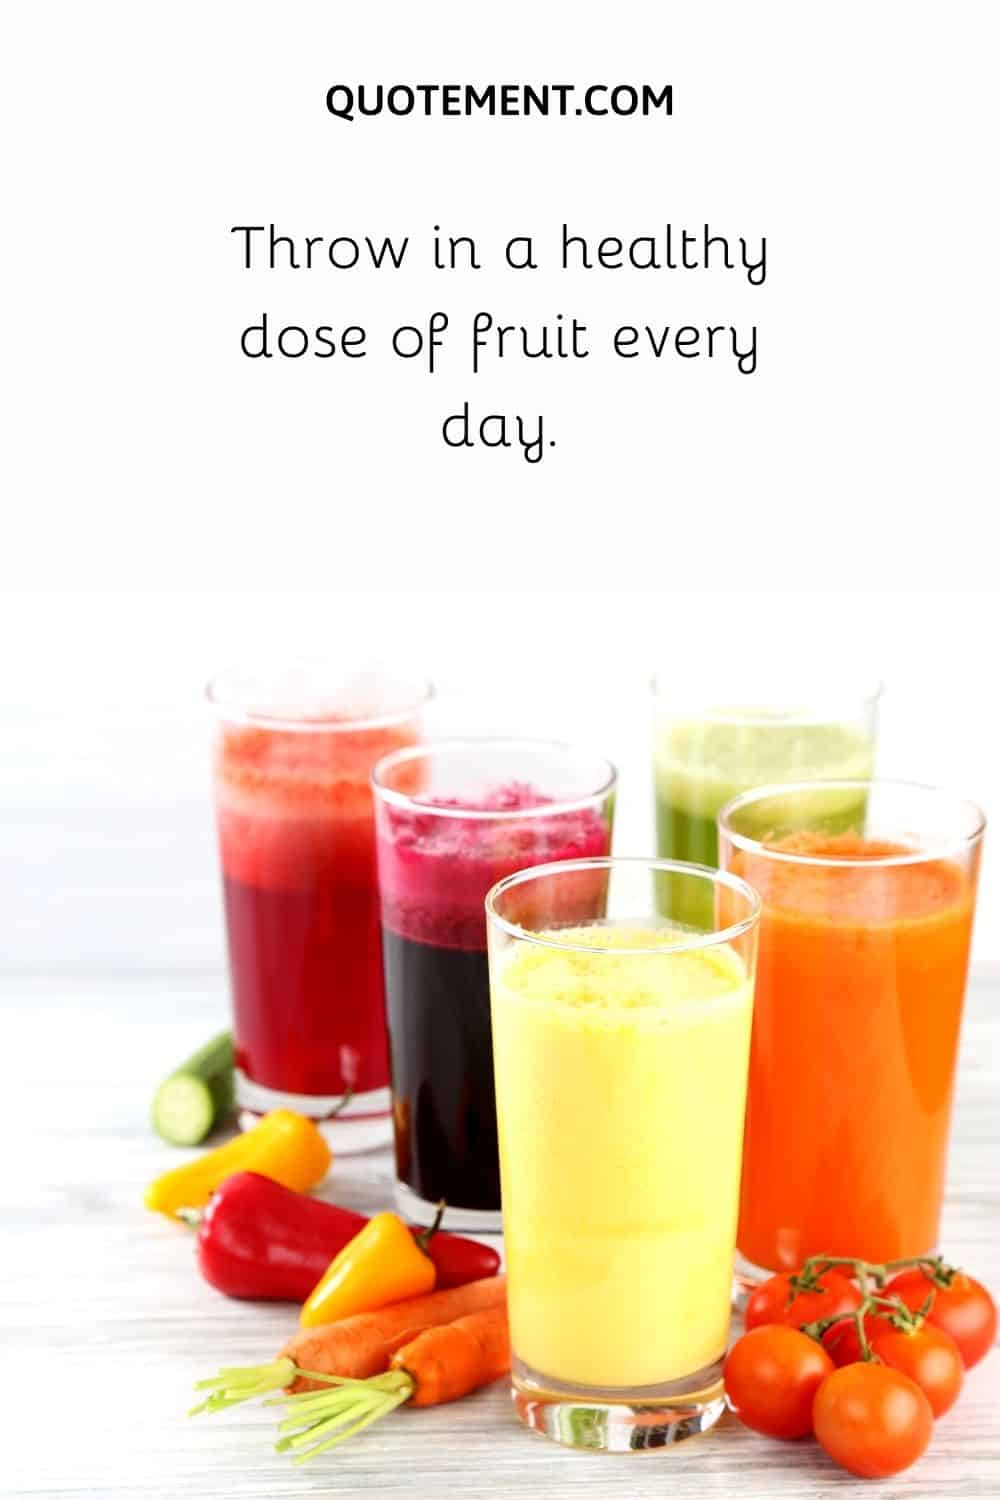 Throw in a healthy dose of fruit every day